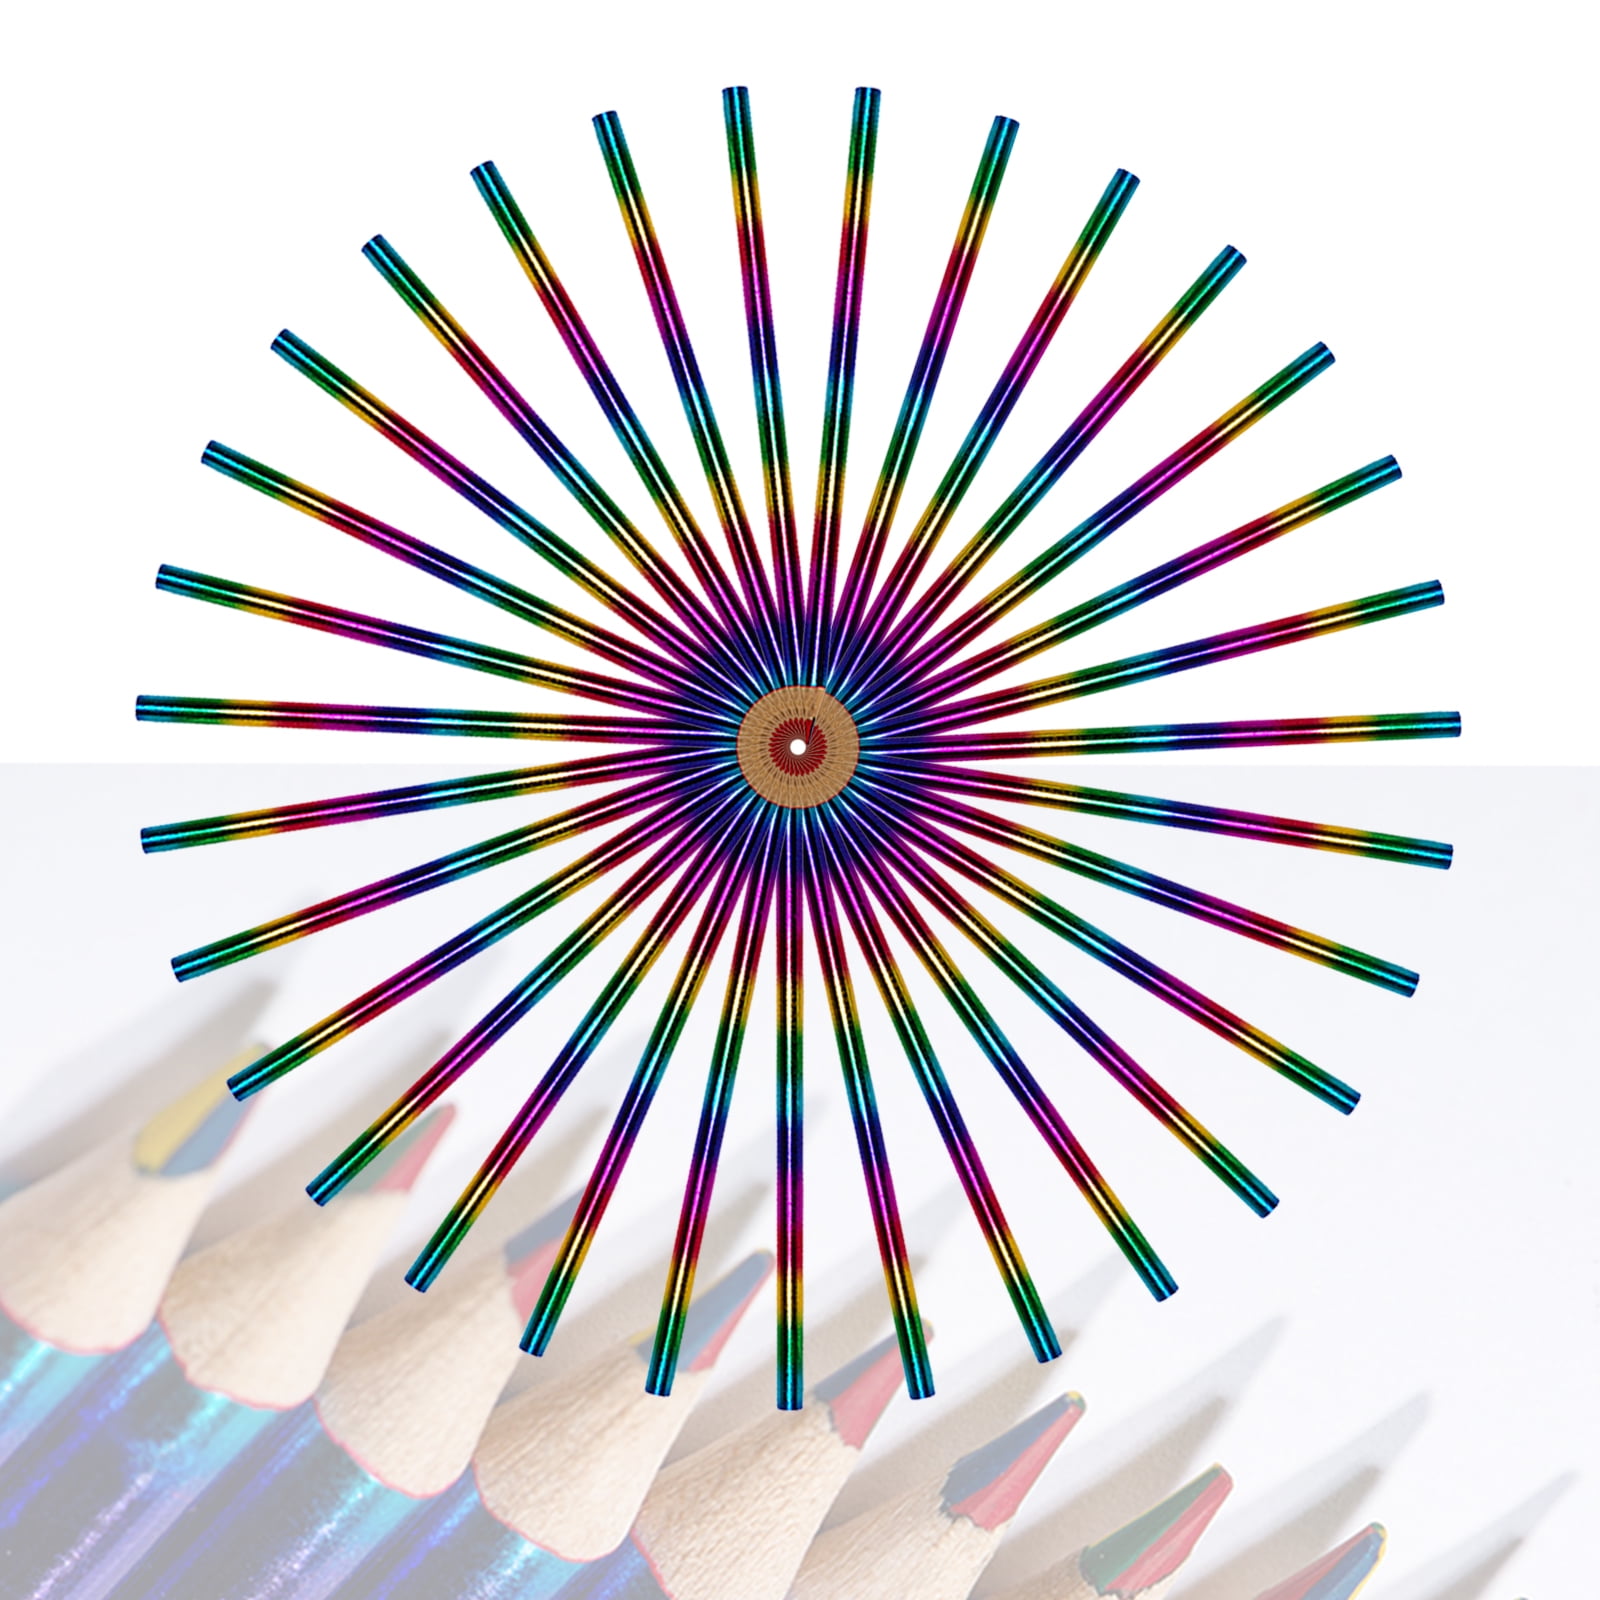 30 Pieces Rainbow Colored Pencils for Kids, 4 in 1 Colored Pencils, Rainbow  Pencil, Assorted Colors Pencil for Adult and Kids Coloring for Drawing  Stationery, 